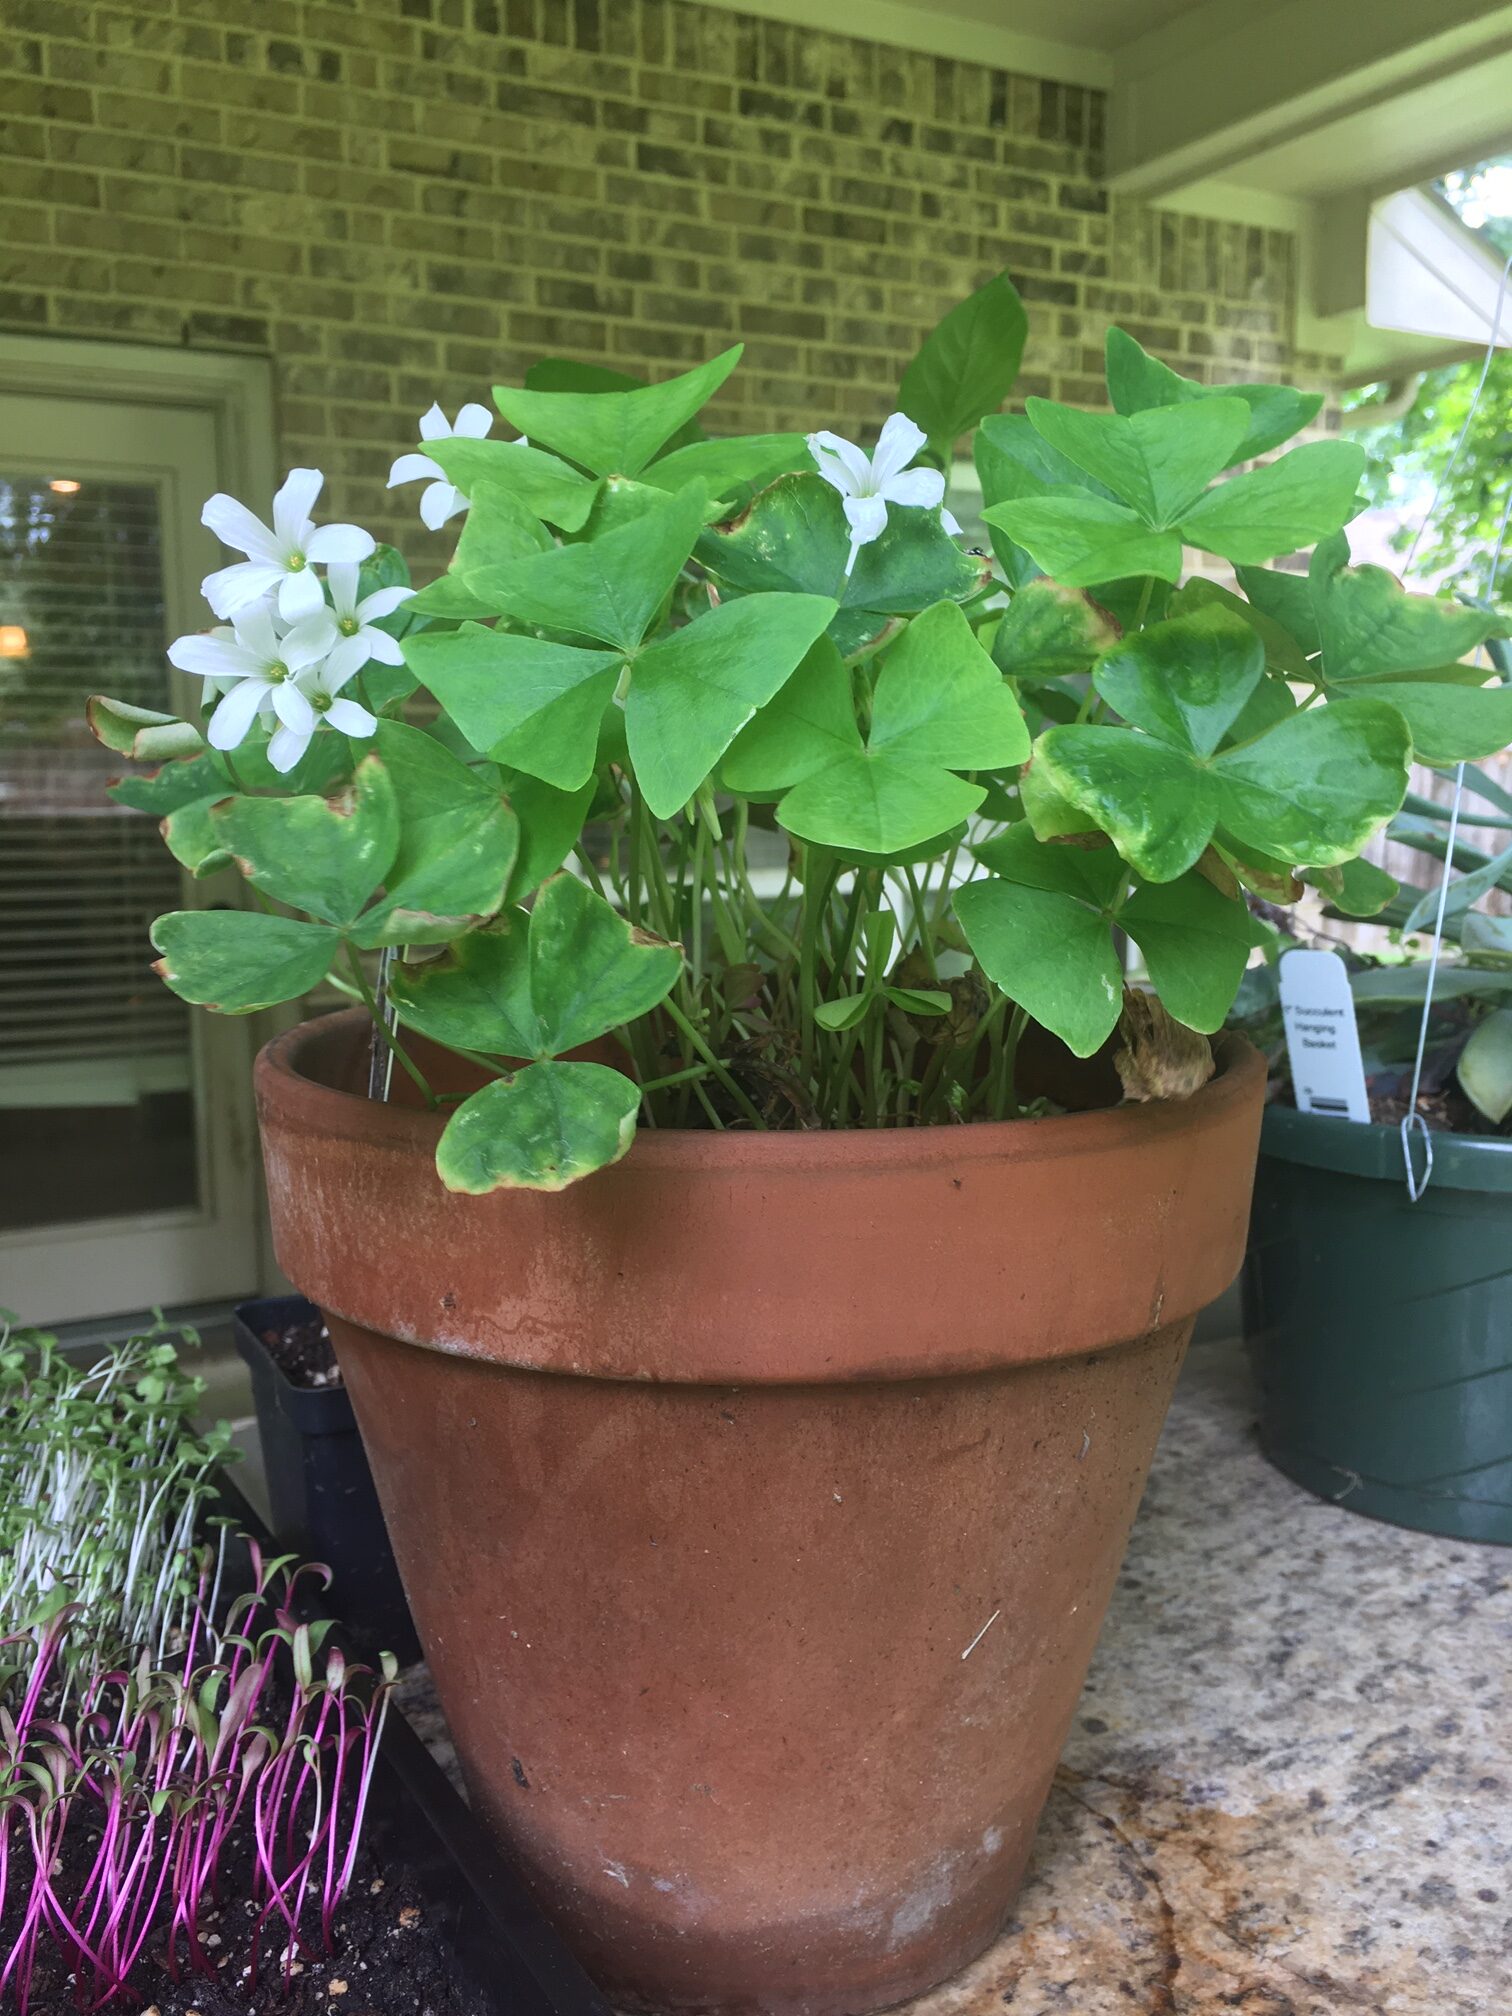 A pot of oxalis I've been nurturing all winter